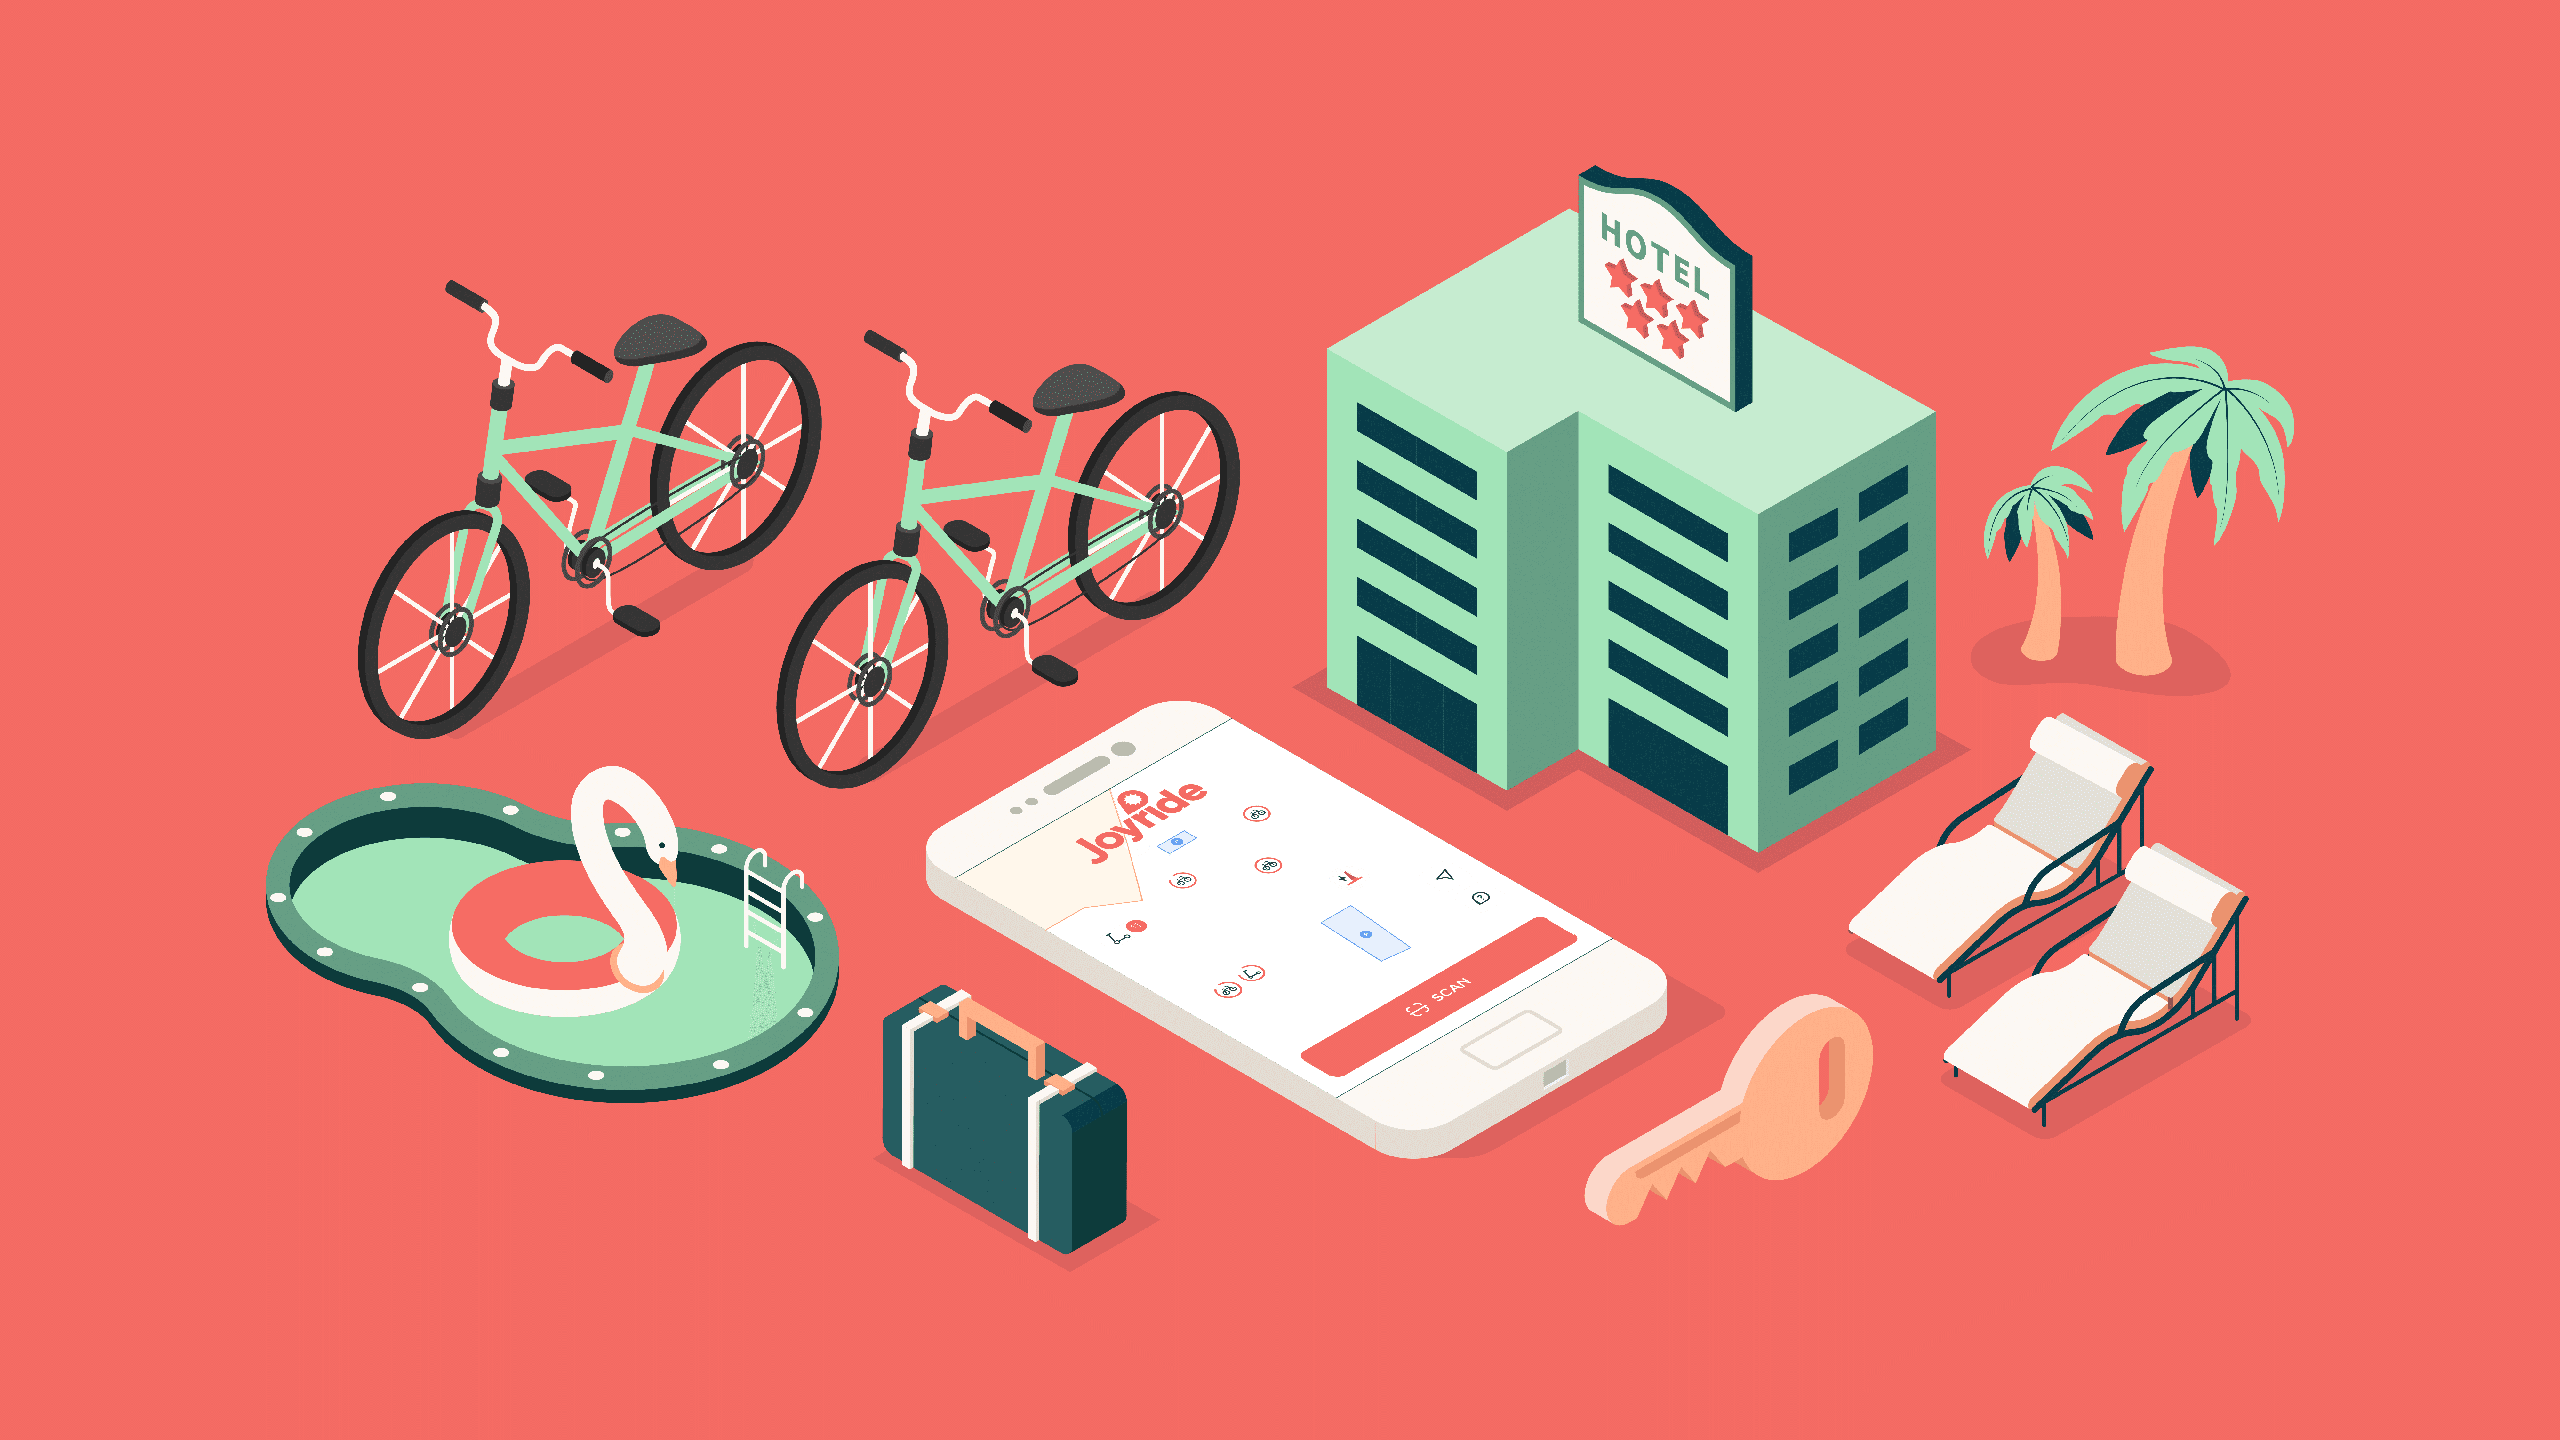 illustration of isometric objects relating scooter and bike sharing to hotels